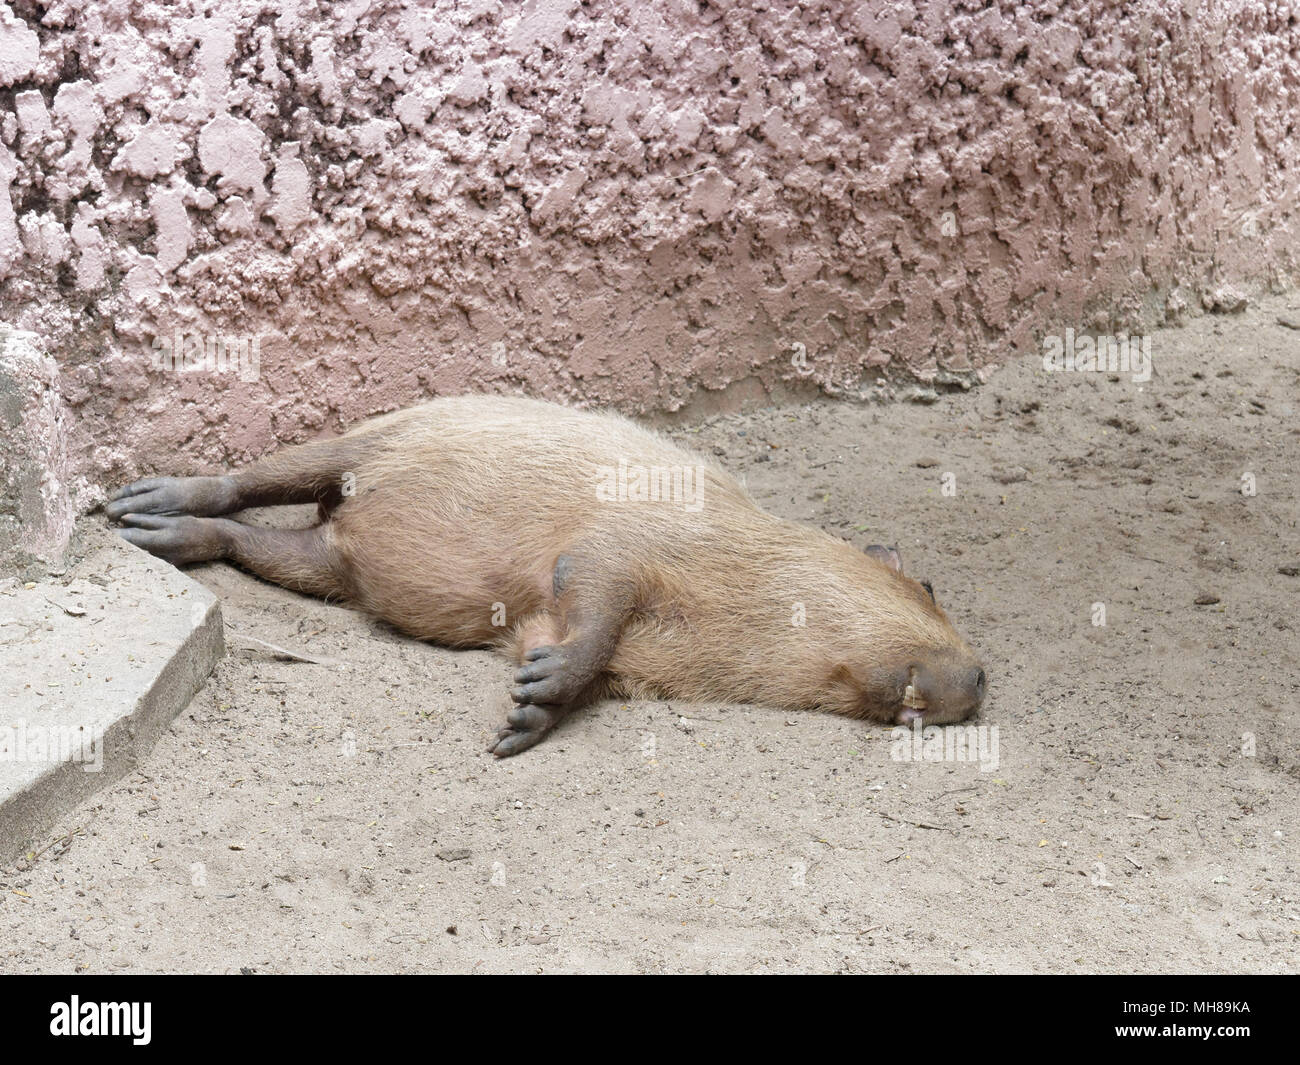 Big brown capybara, biggest rodents, sleeping like a log or sleeping away or dead to the world with open mouth show his two big teeth show tiredness, fatigue, weariness and exhaustion Stock Photo